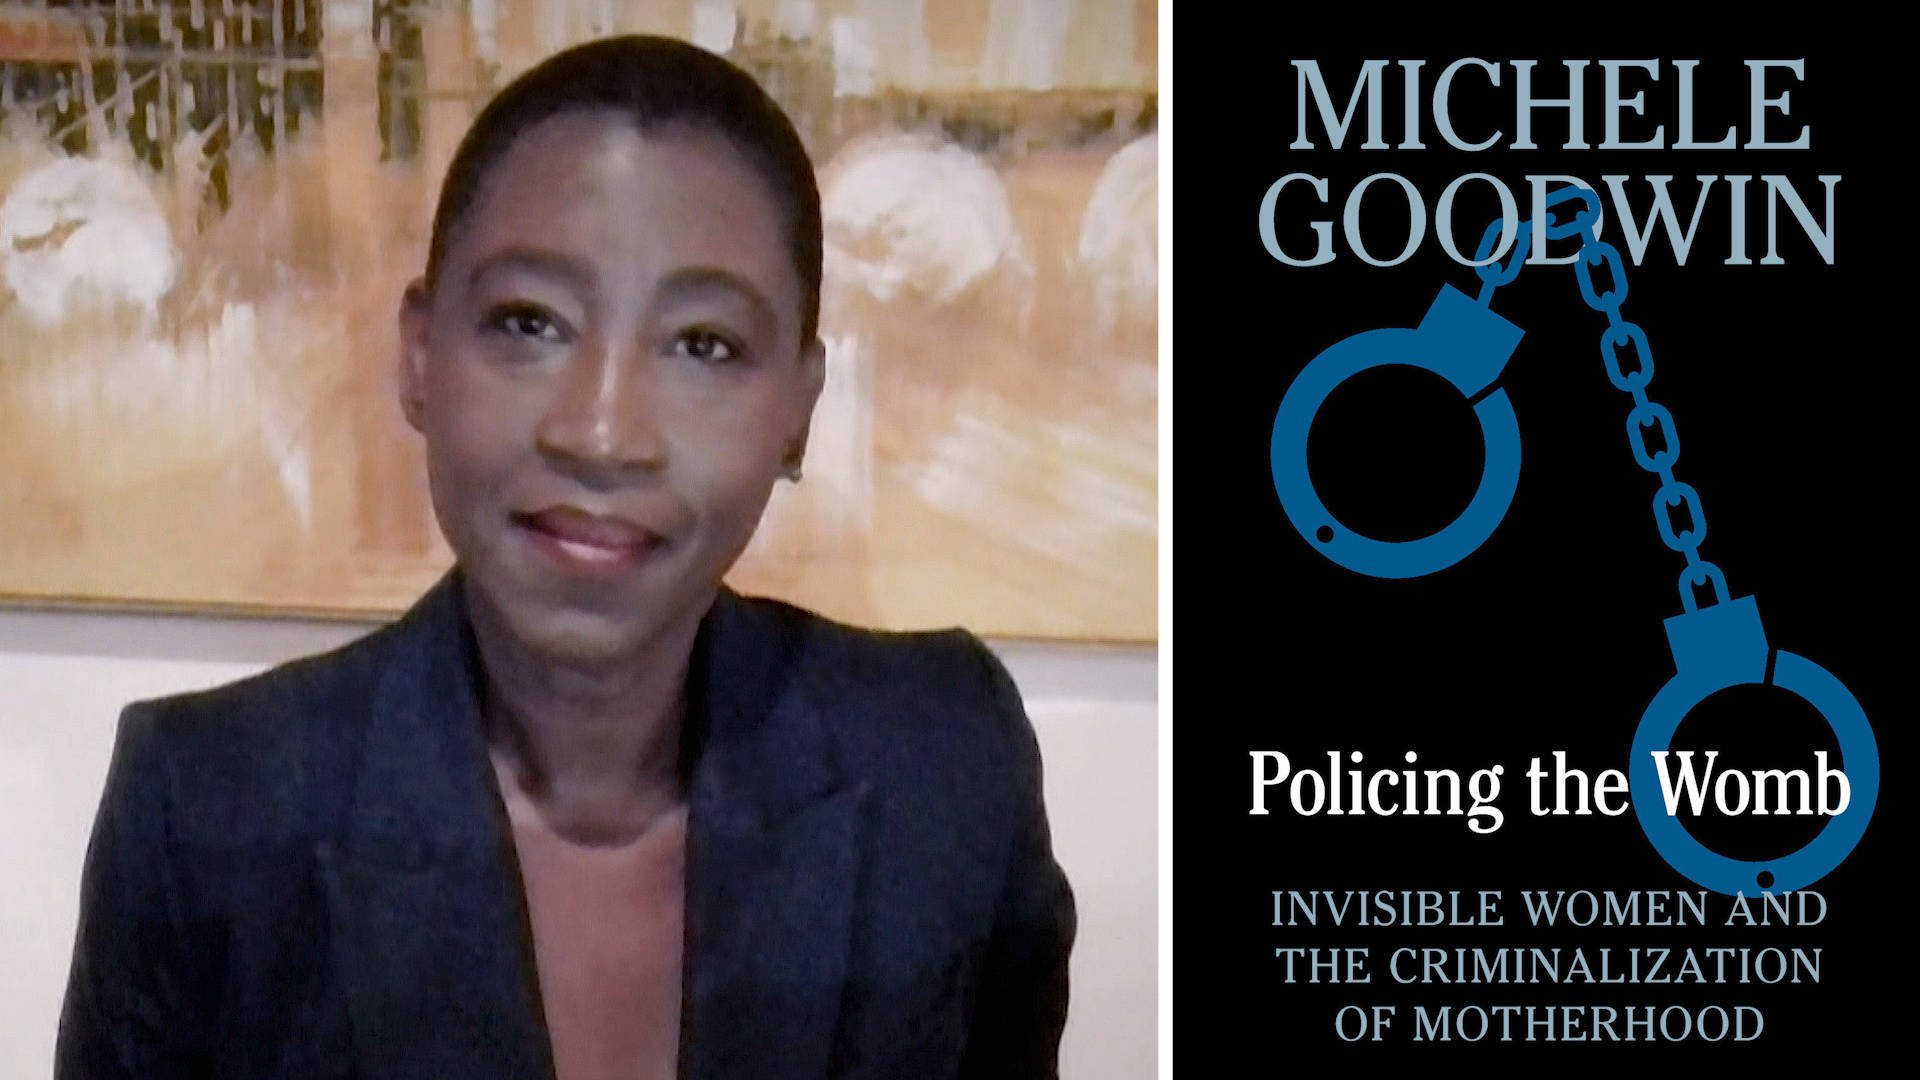 “Policing the Womb”: Law Professor Michele Goodwin on SCOTUS, Anti-Abortion Laws & the New Jane Crow